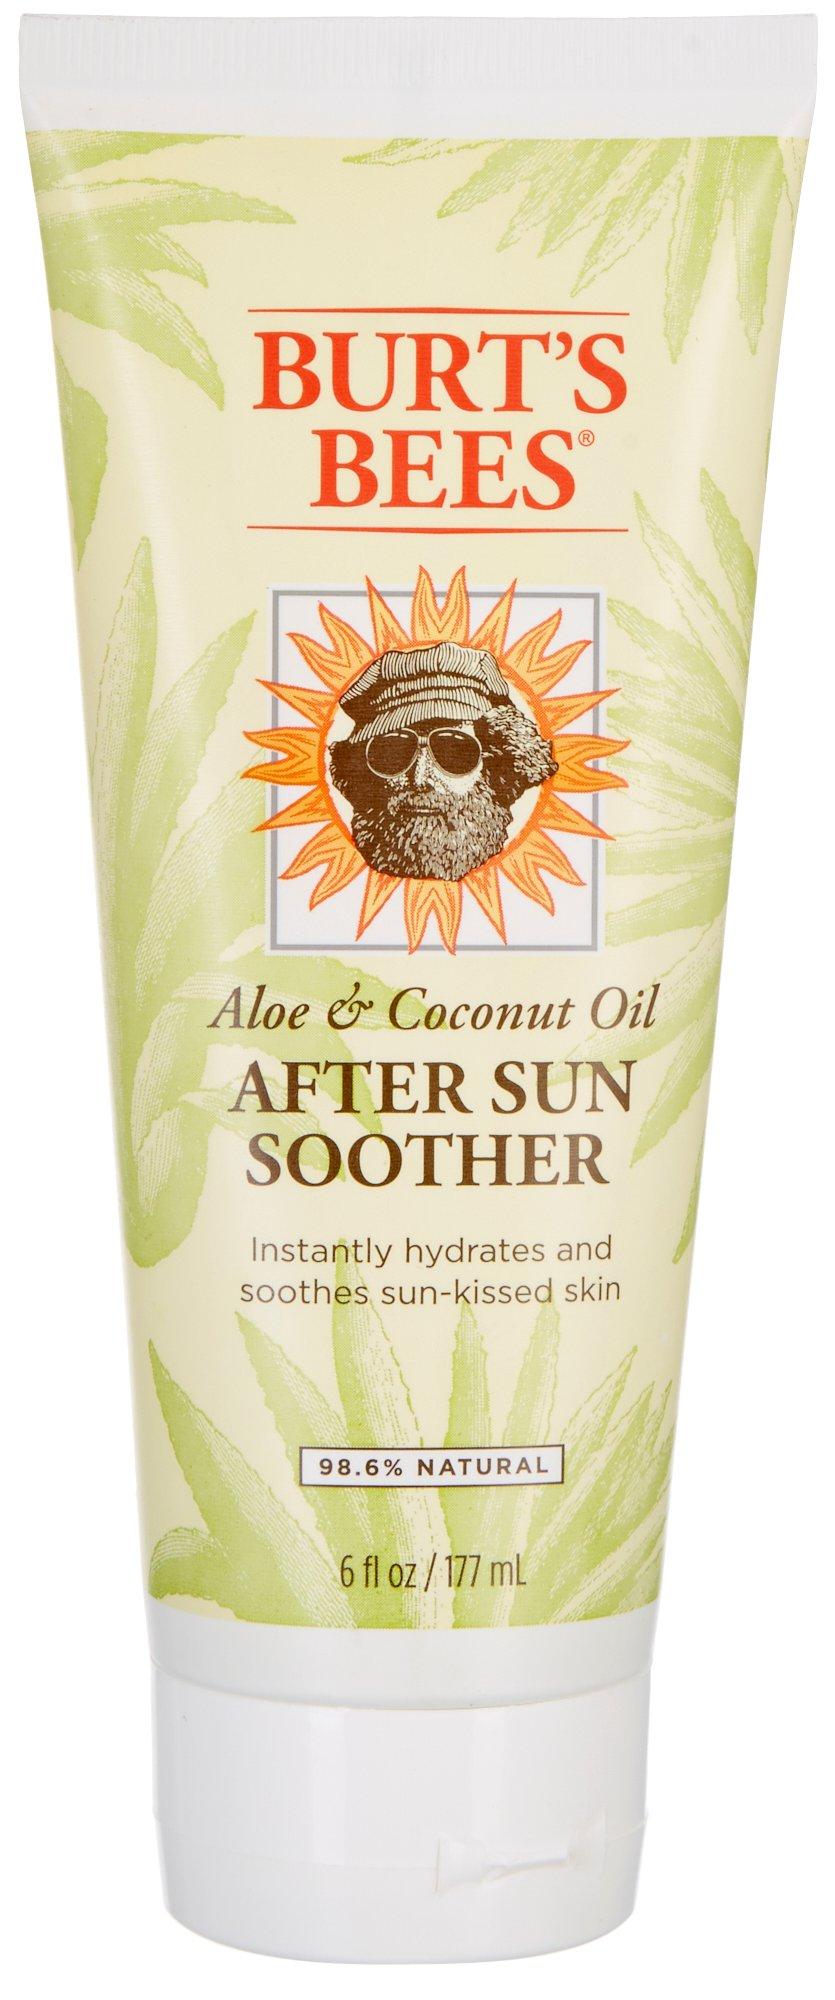 After Sun Soother With Aloe & Coconut Oil